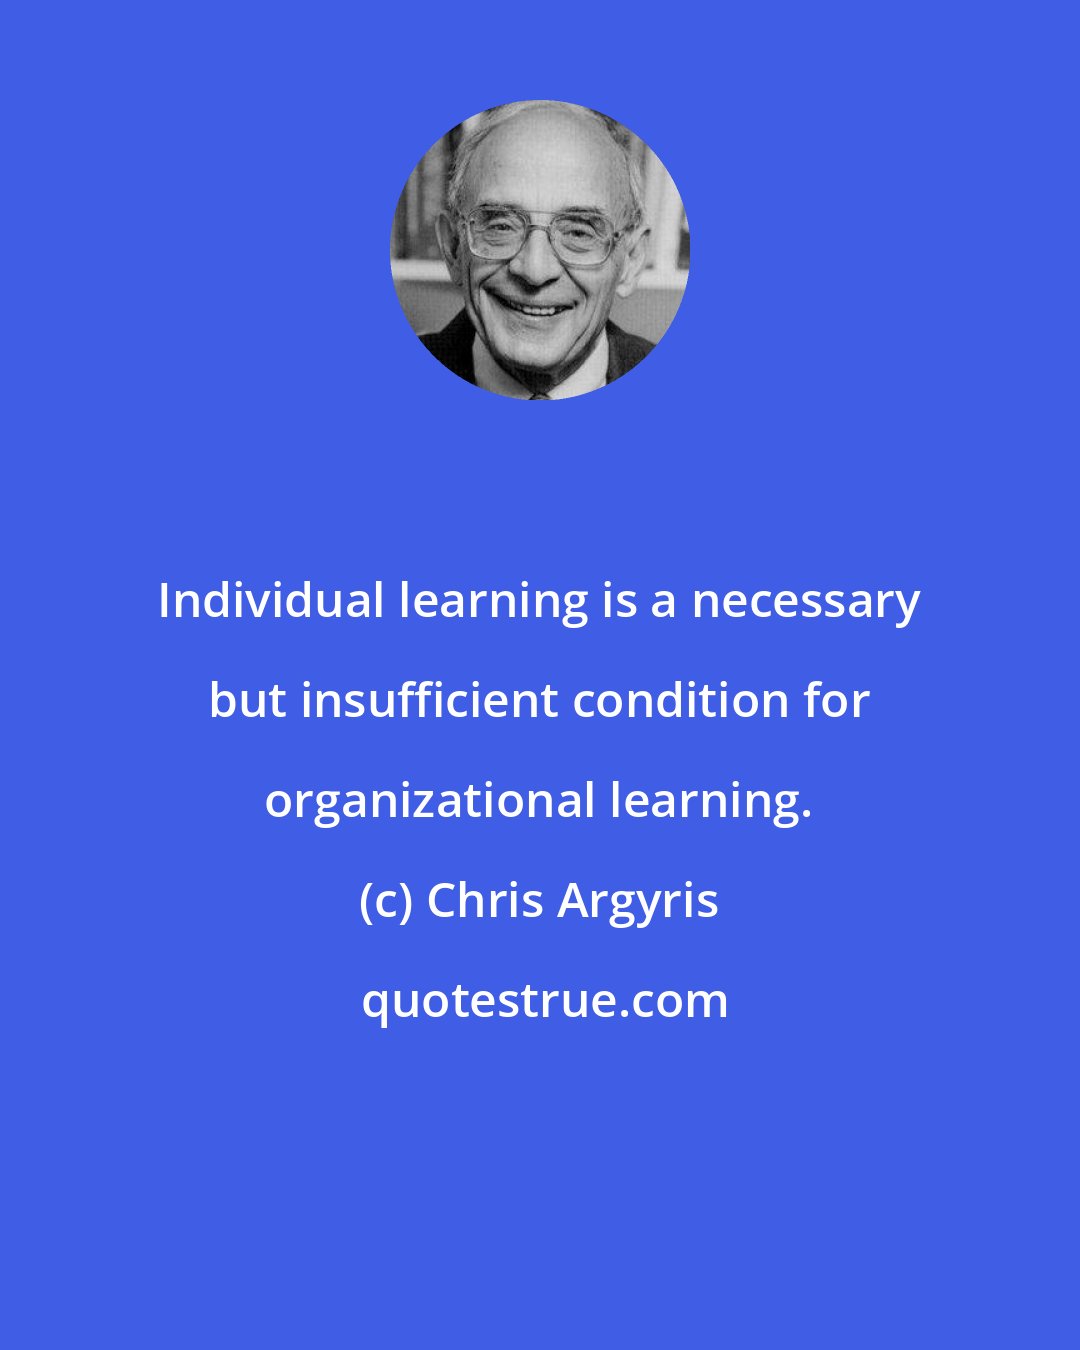 Chris Argyris: Individual learning is a necessary but insufficient condition for organizational learning.